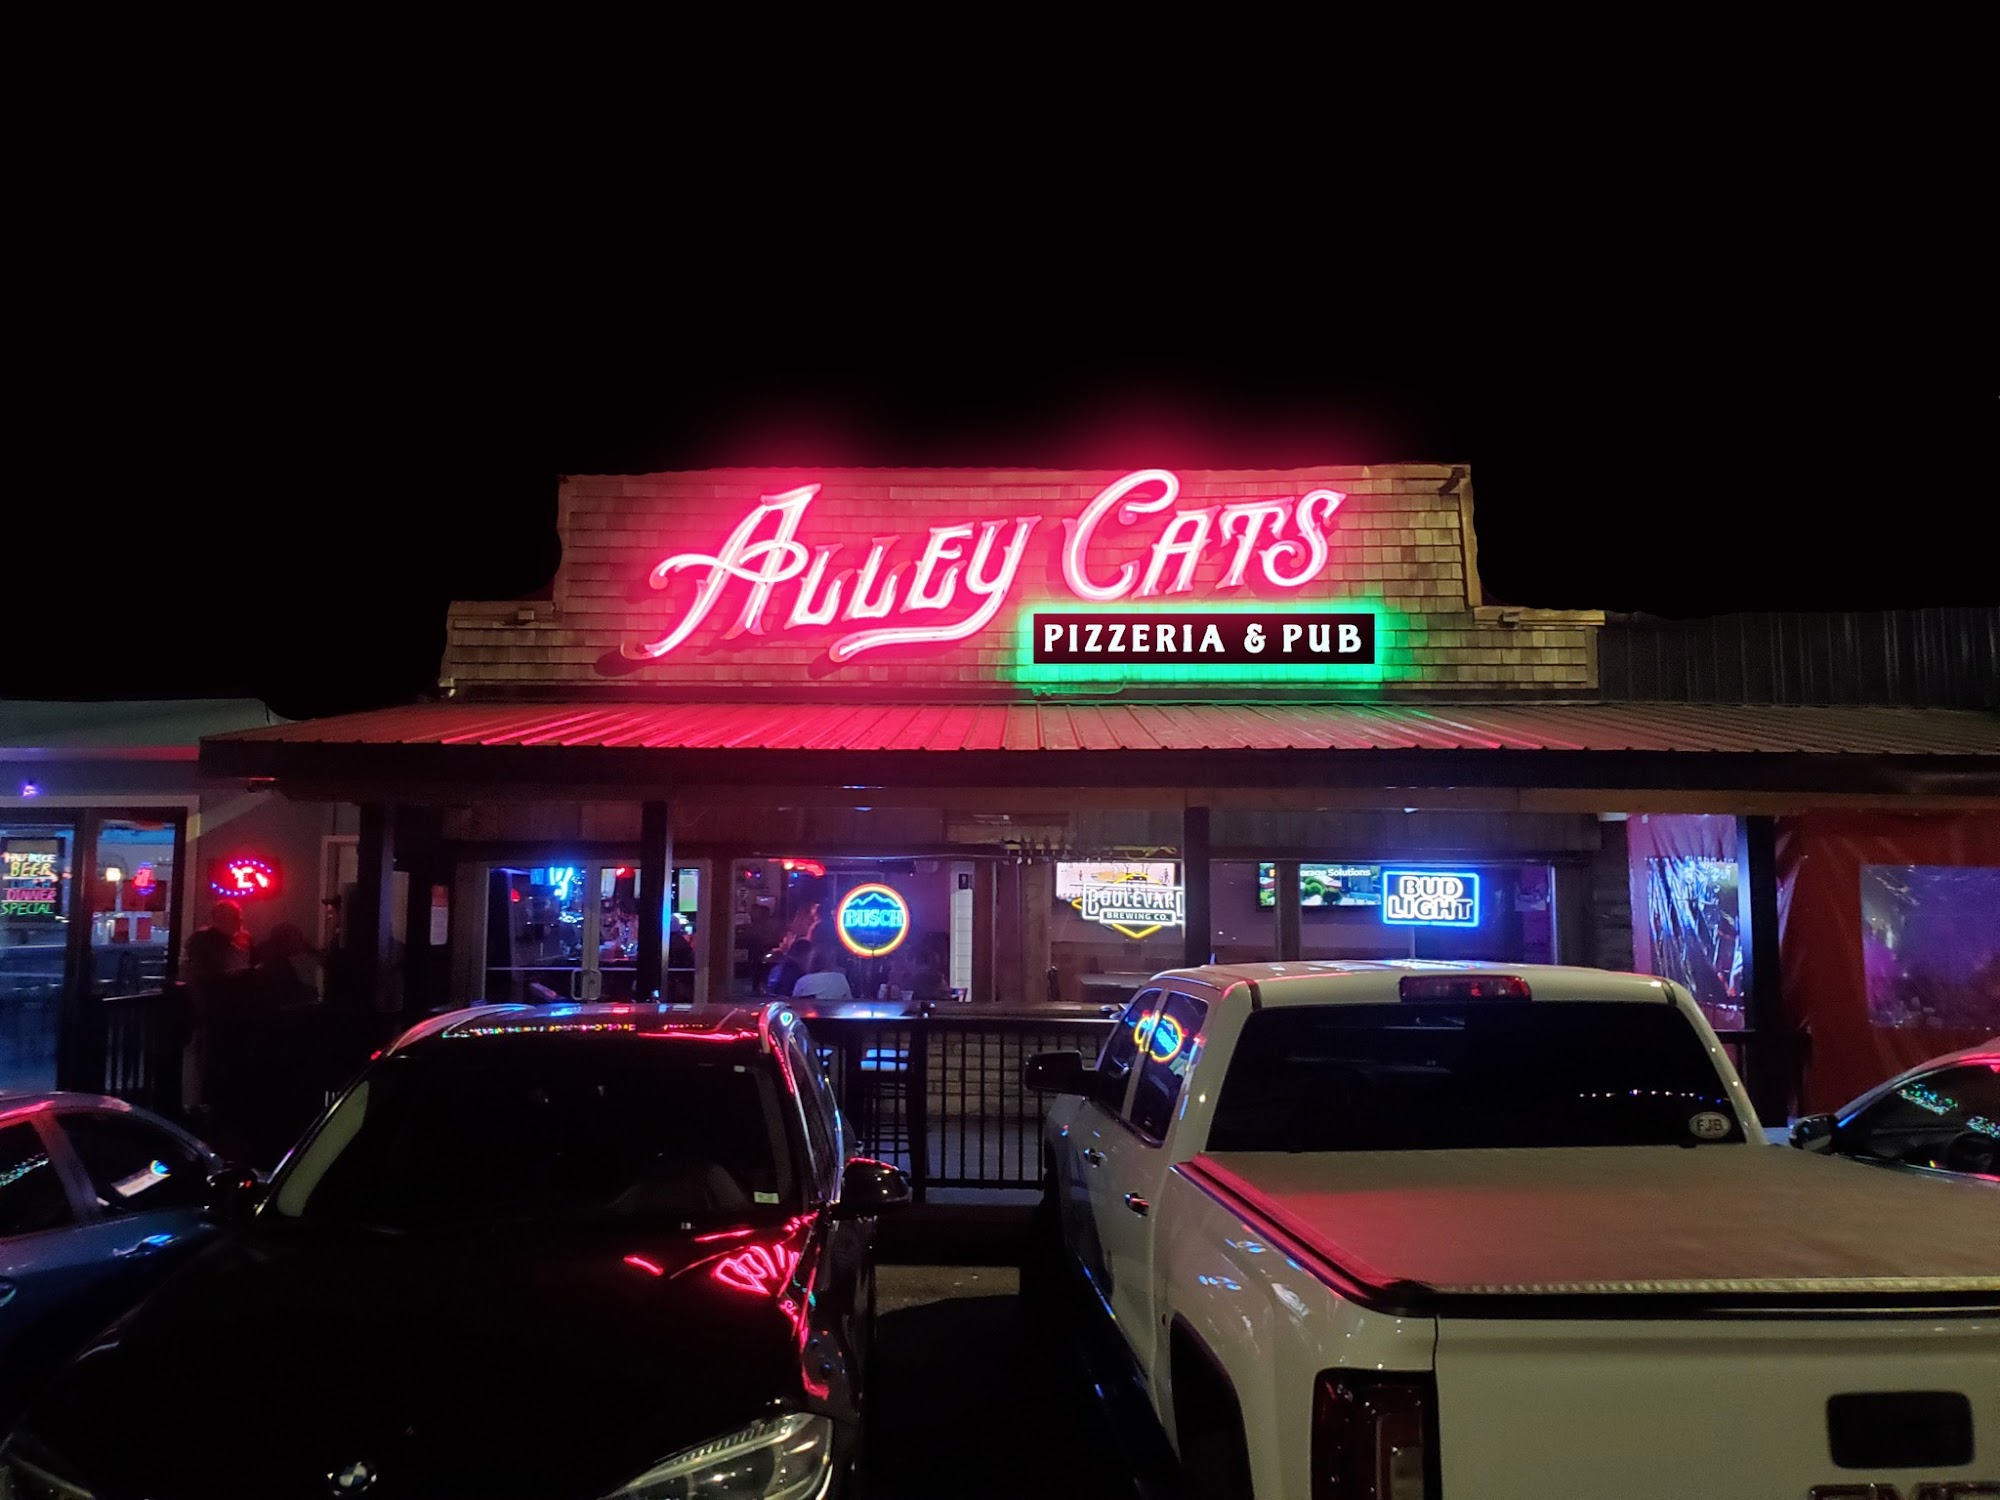 Alley Cats Pizzeria